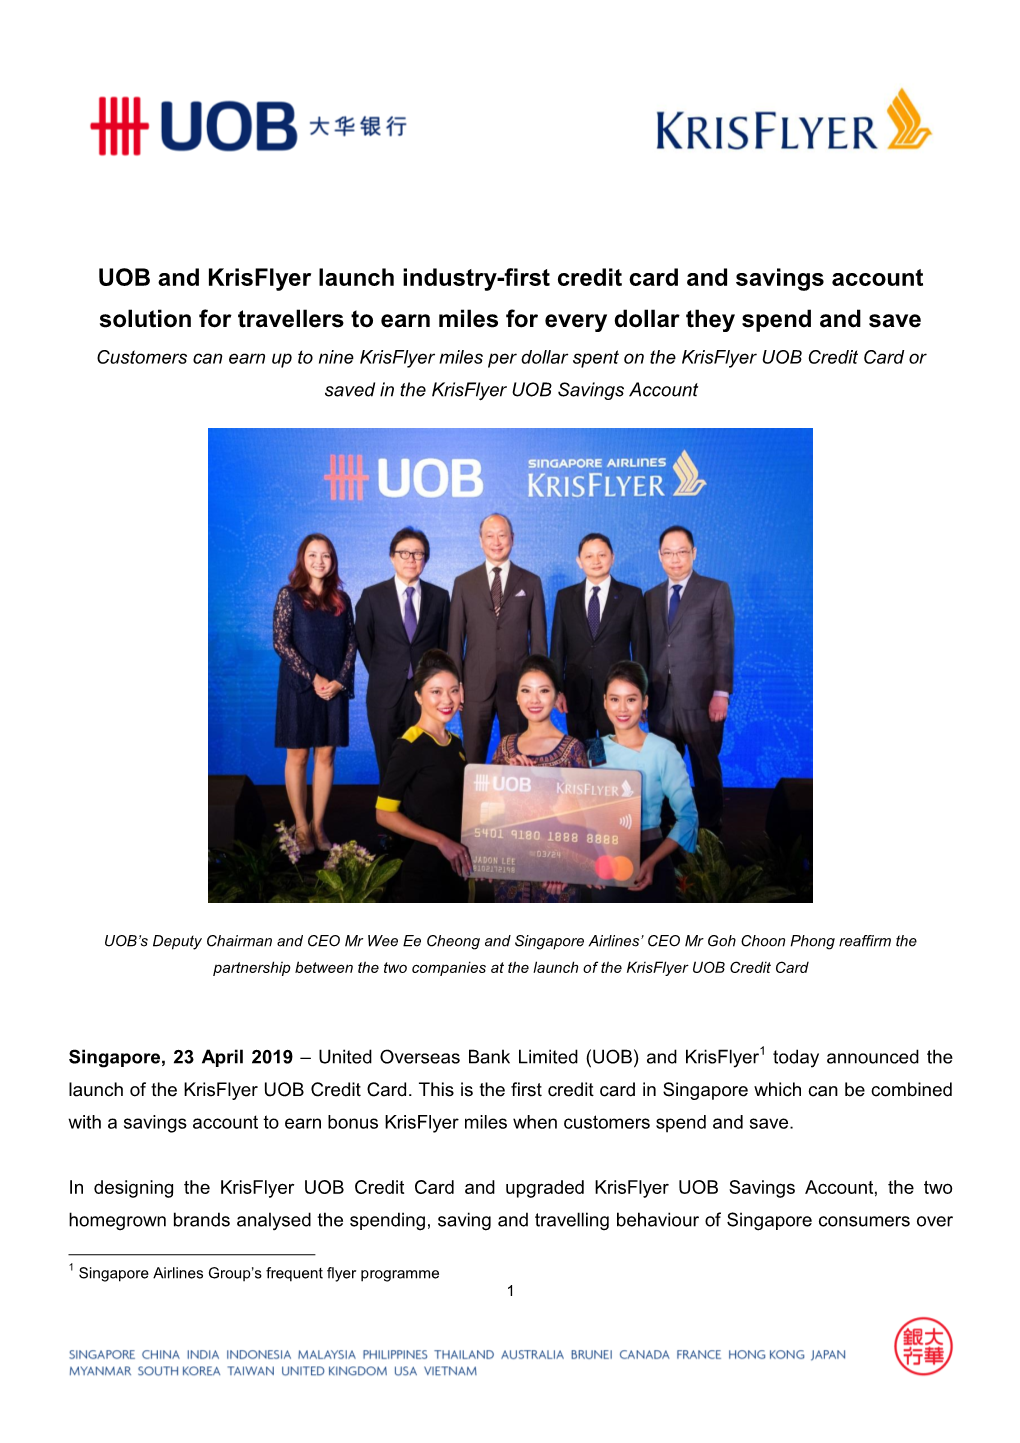 UOB and Krisflyer Launch Industry-First Credit Card and Savings Account